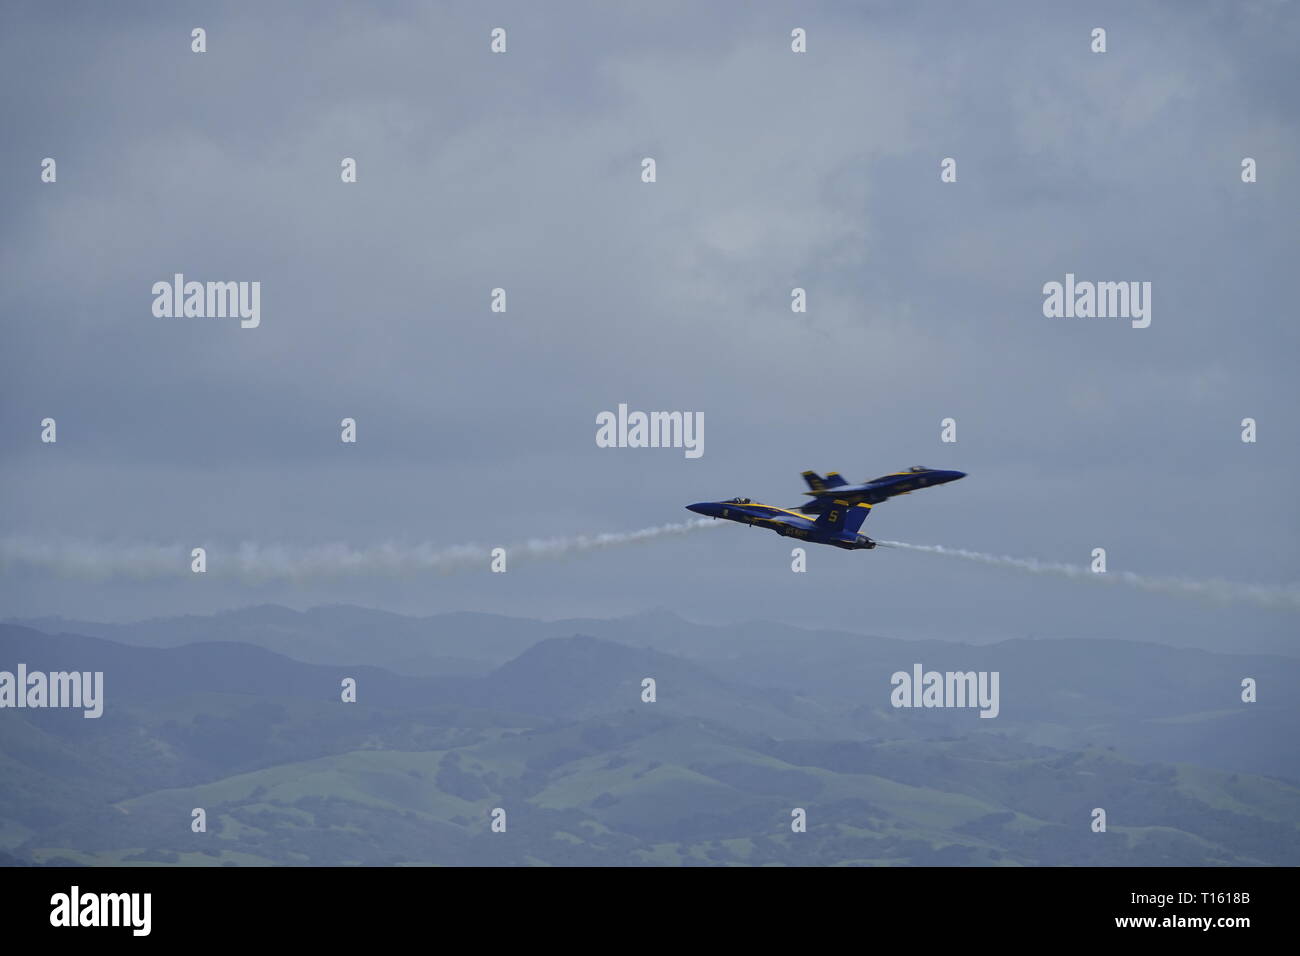 California, USA. 23rd Mar, 2019. 23rd March, 2019   Salinas, California, USA        Scenes from the annual  Salinas Air-Show, featuring the US Navy 'Blue Angels' arobatic team here seen preparing, parading and performing spectacularly over the airfield. Credit: Motofoto/Alamy Live News Stock Photo